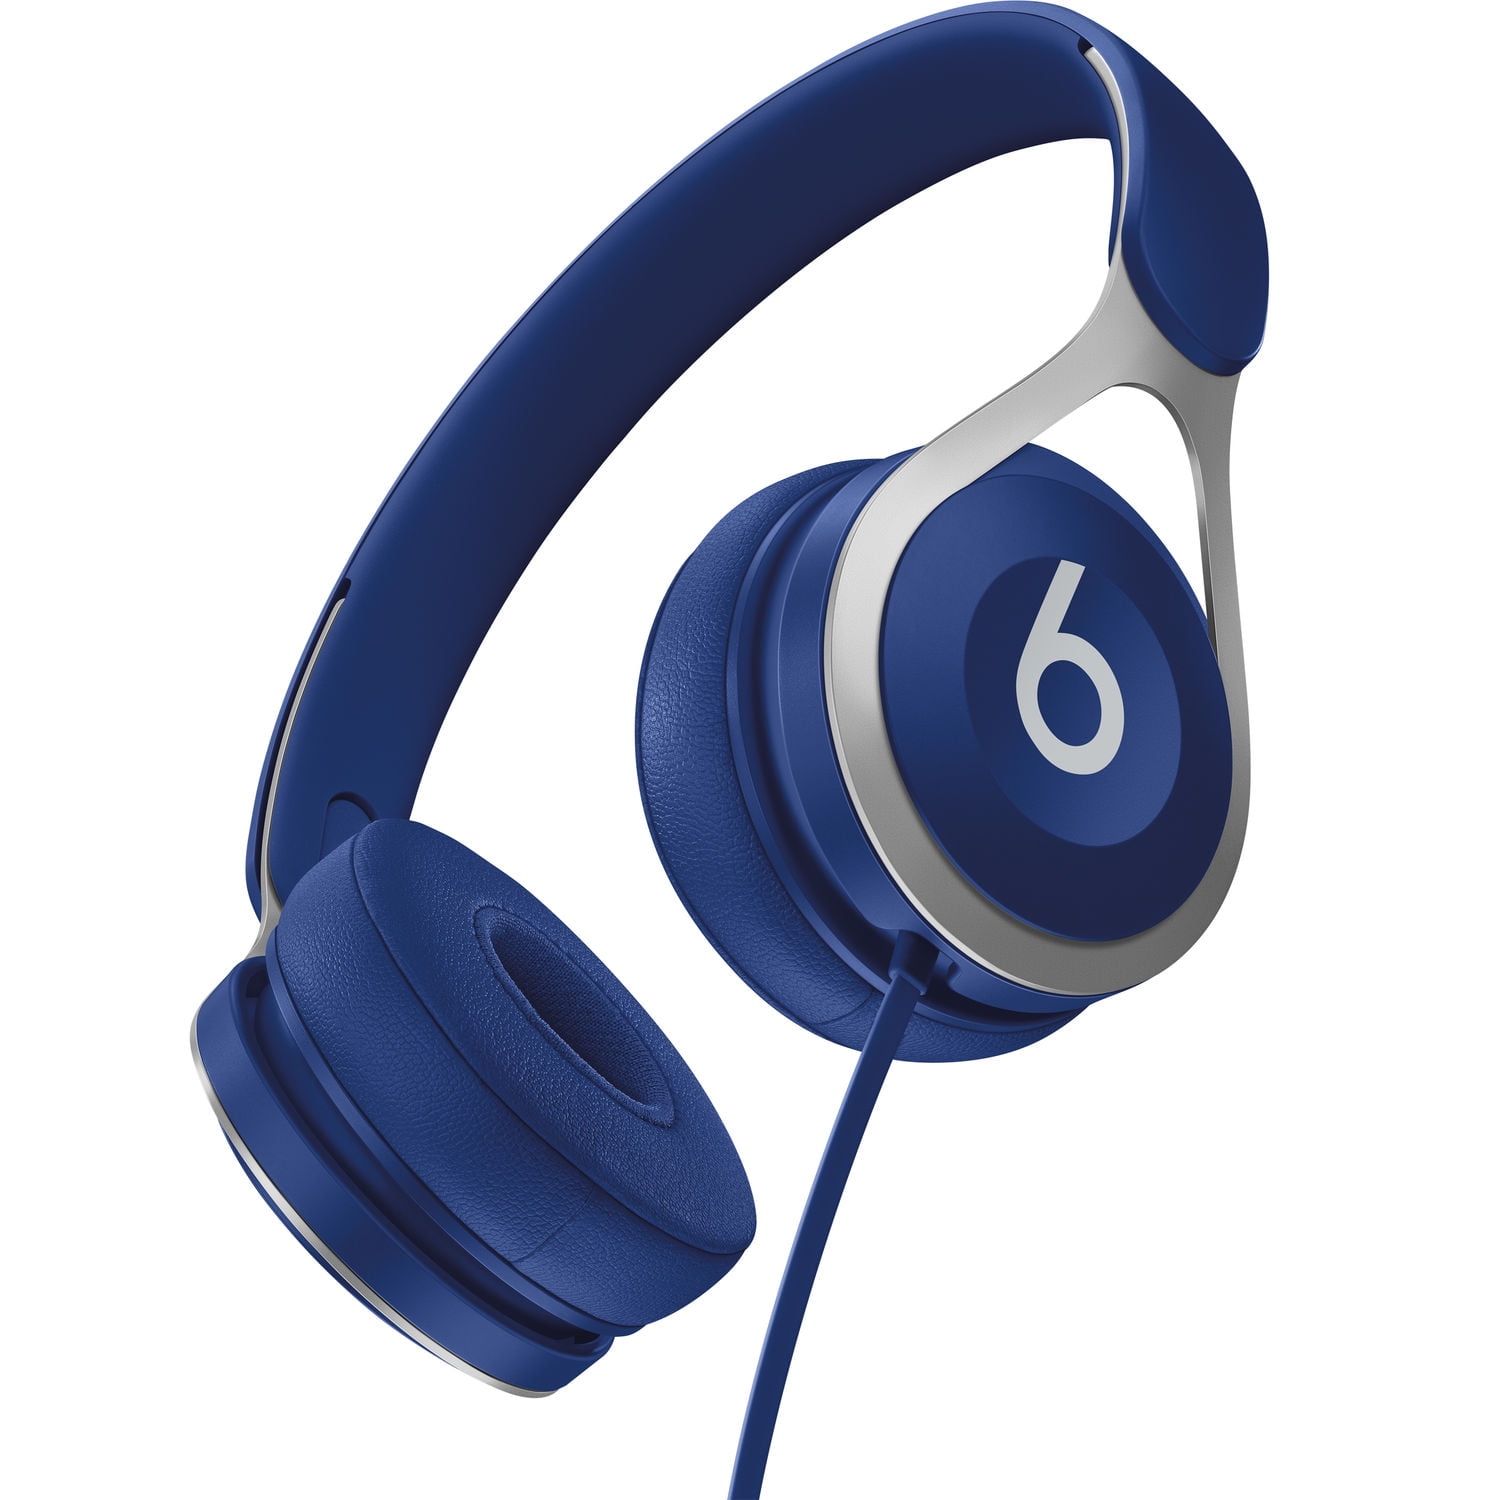 Beats EP Wired On-Ear Headphones - Battery Free for Unlimited Listening, Built in Mic and Controls - (Blue) - Walmart.com